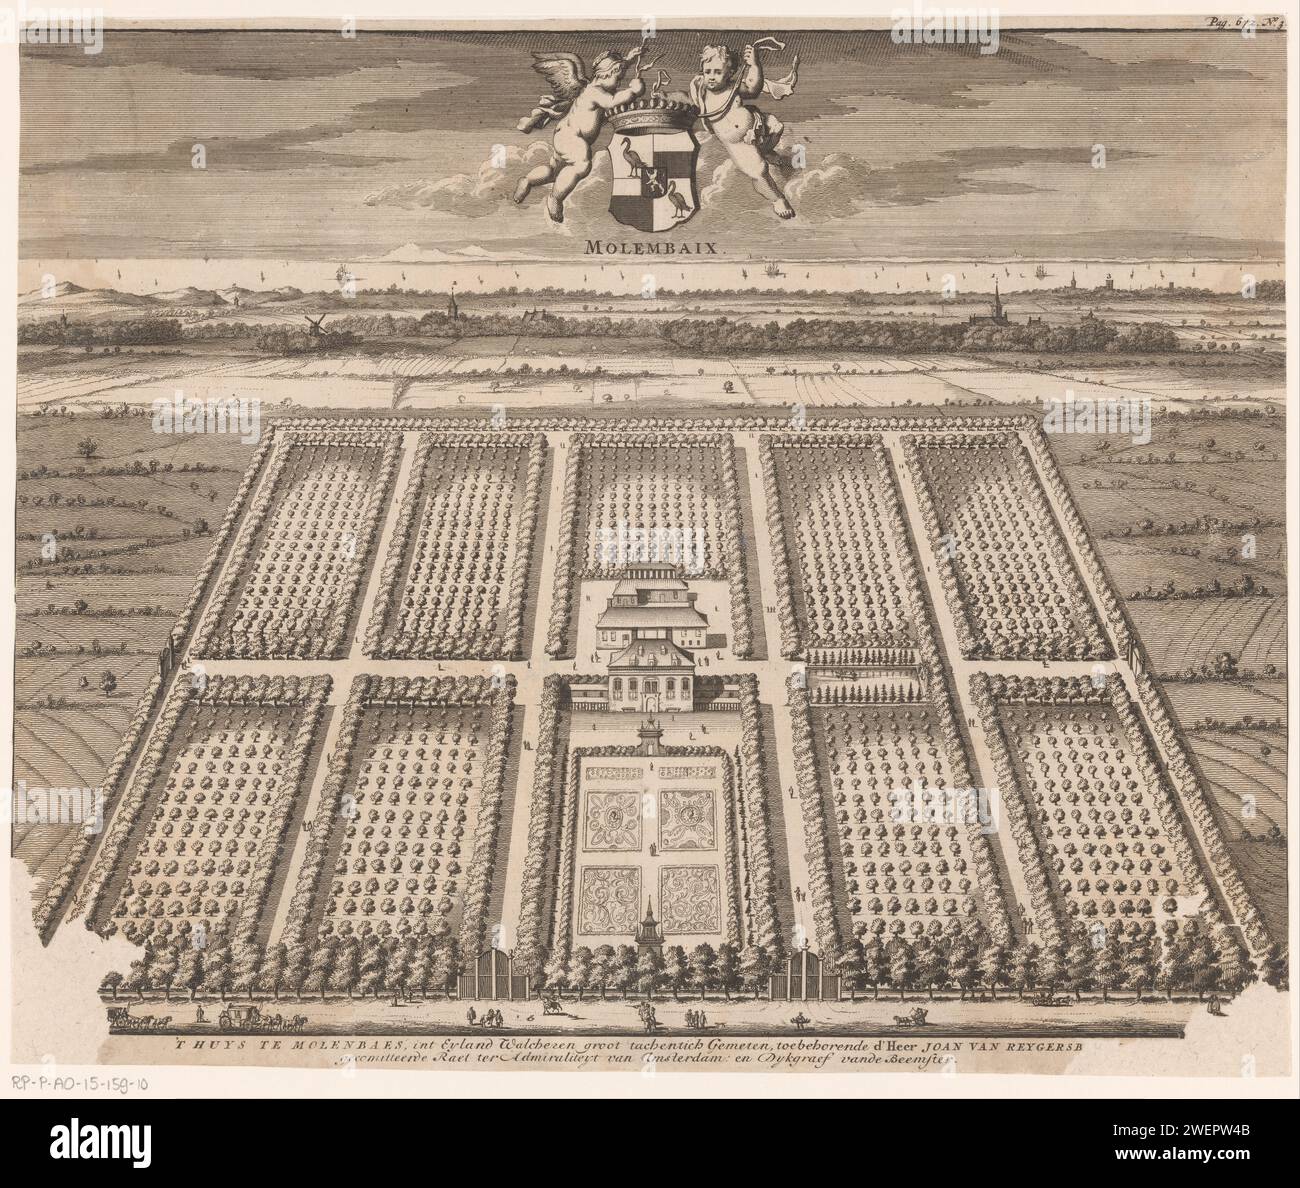 View of the Buitenplaats Molembaix, Anonymous, 1696 print View of the Molembaix country estate near Grijpskerke on Walcheren, in a nutshell perspective. In the middle the house and around the gardens and orchards. At the top in the middle two putti with the weapon of Johan van Reygersberge, owner of this country estate. Numbered at the top right: p. 672. No. 3.  paper etching / engraving country-house. garden. French or architectonic garden; formal garden. gate, entrance. armorial bearing, heraldry. orchard Molduix Stock Photo